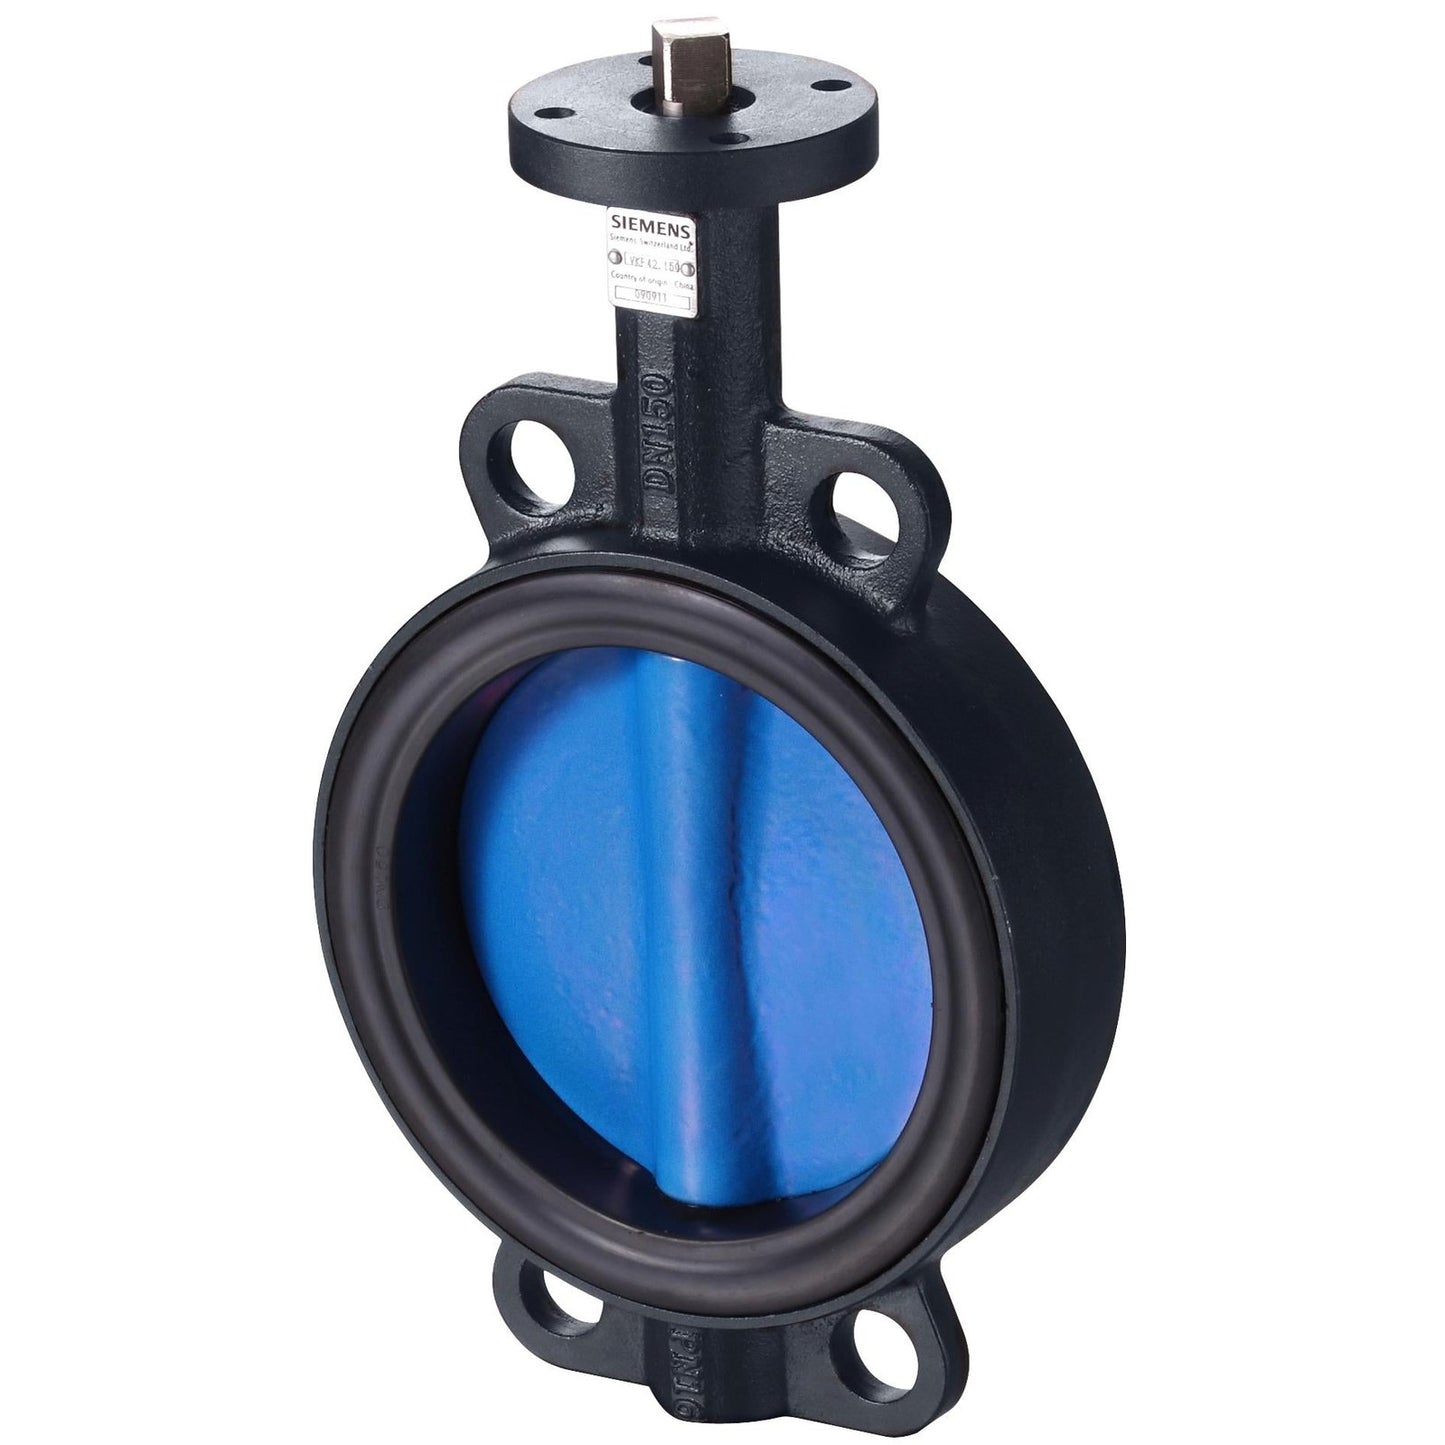 VKF42.250 Butterfly valves PN16 for flanged connections, with tight shutoff